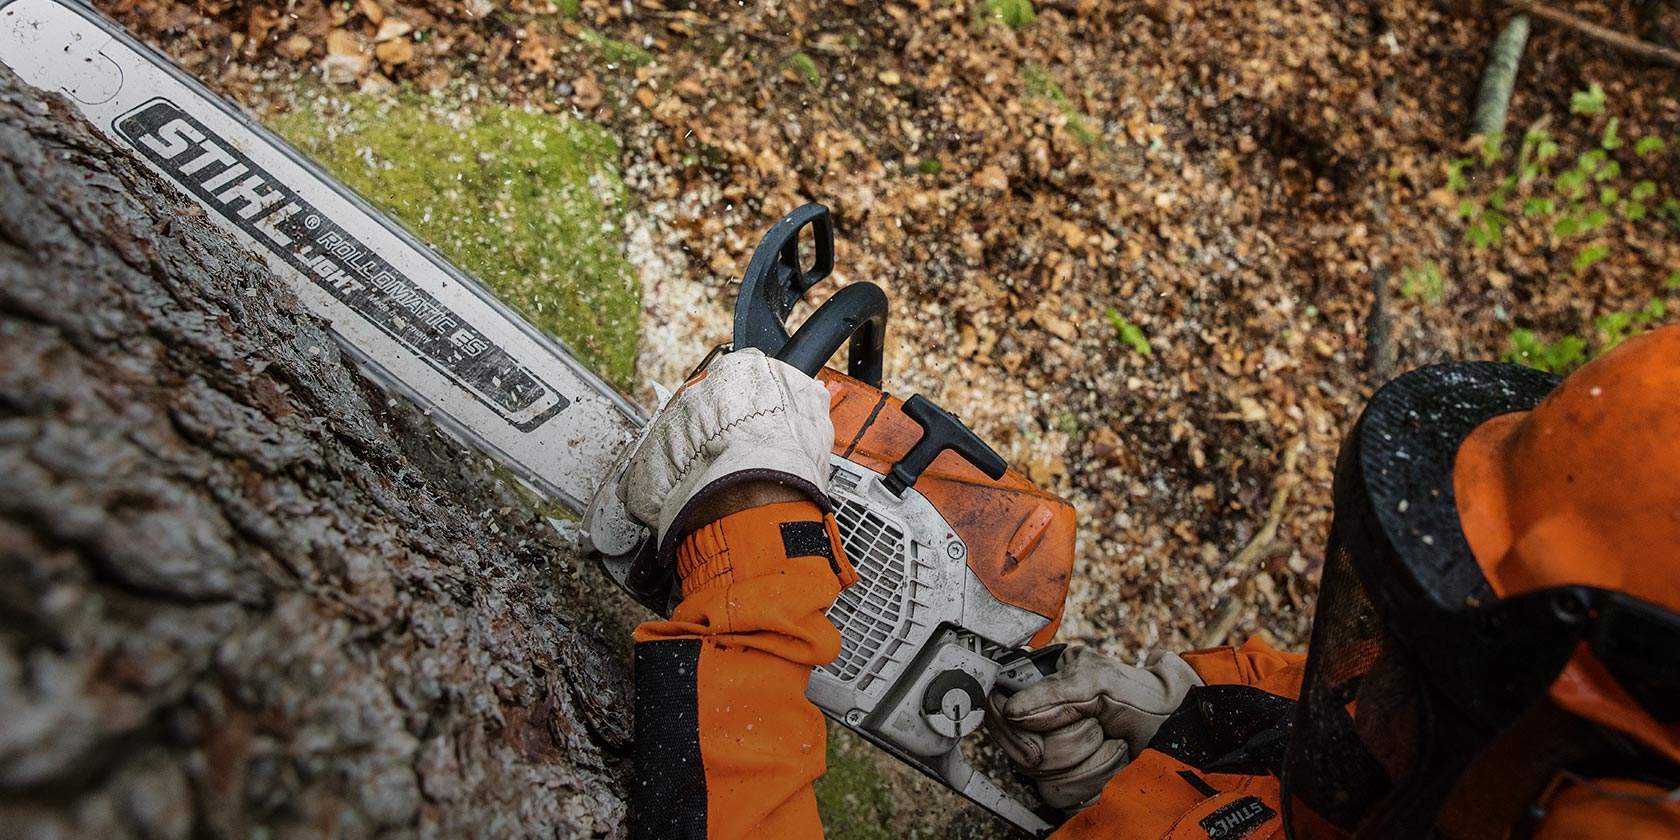 The extremely high acceleration from 0 km/h to 100 km/h in just 0.3 seconds makes the<br/>STIHL MS 462 a powerful, punchy pruning saw.